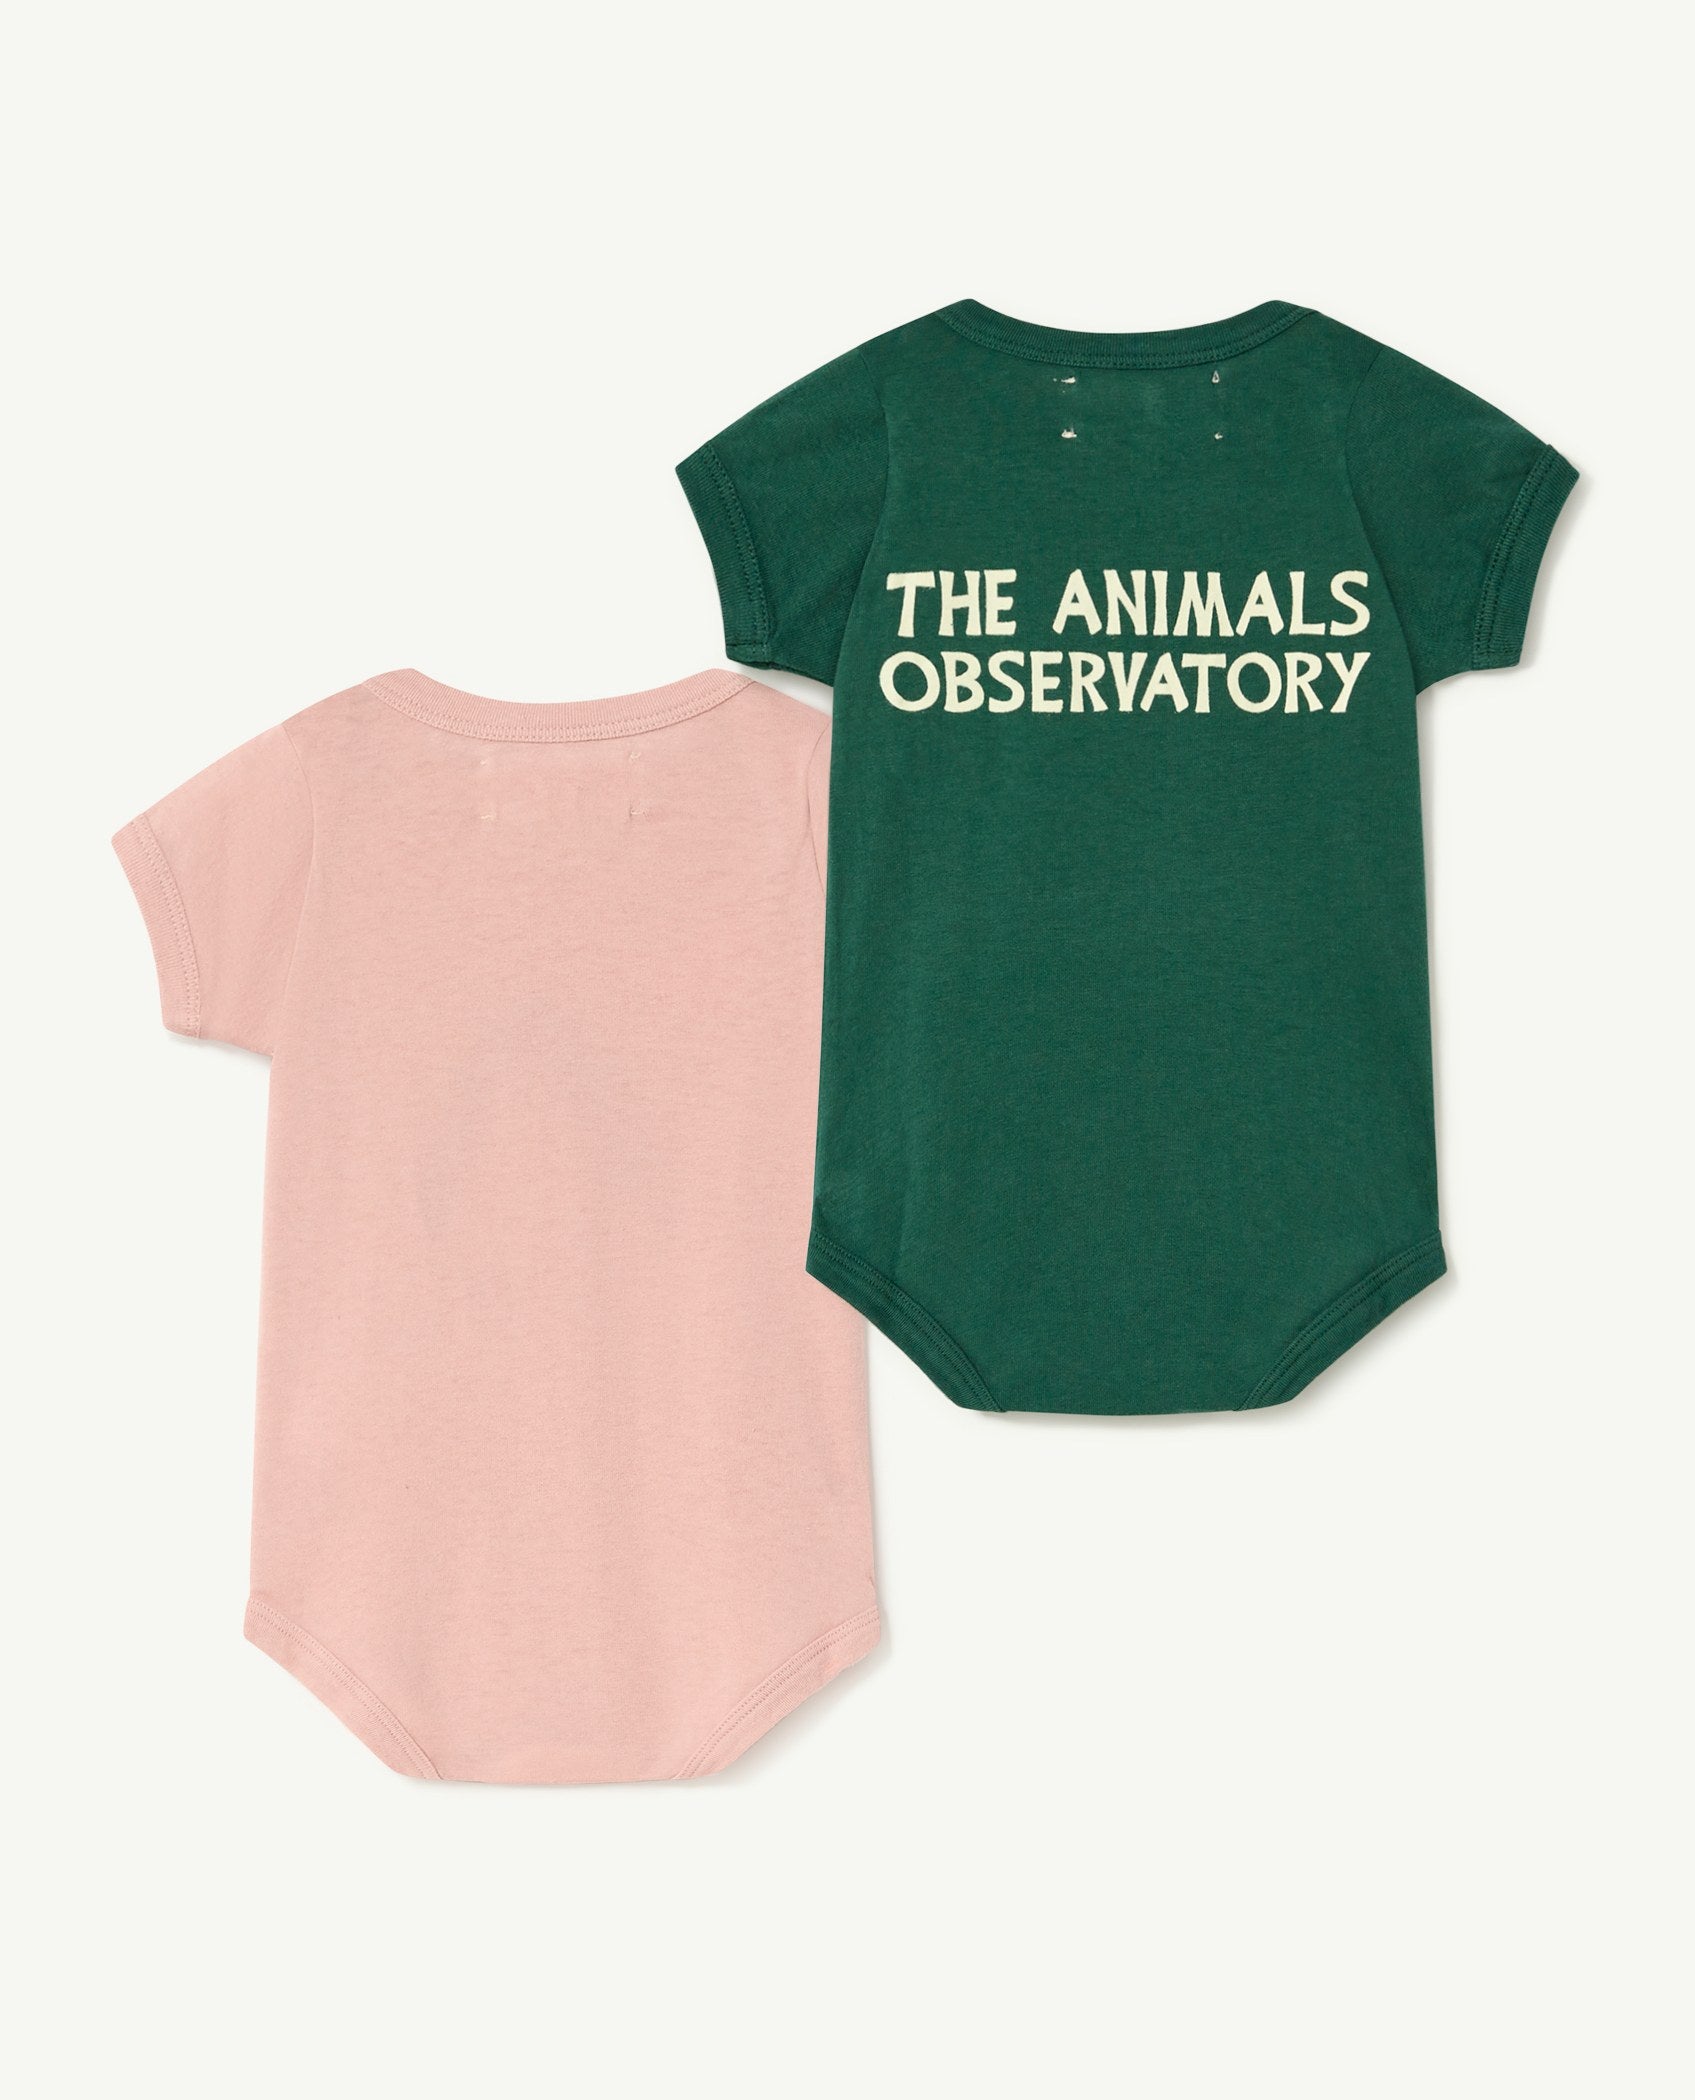 The Animals Observatory Pack Chimpanzee Baby Bodysuit Set - Rose/Green